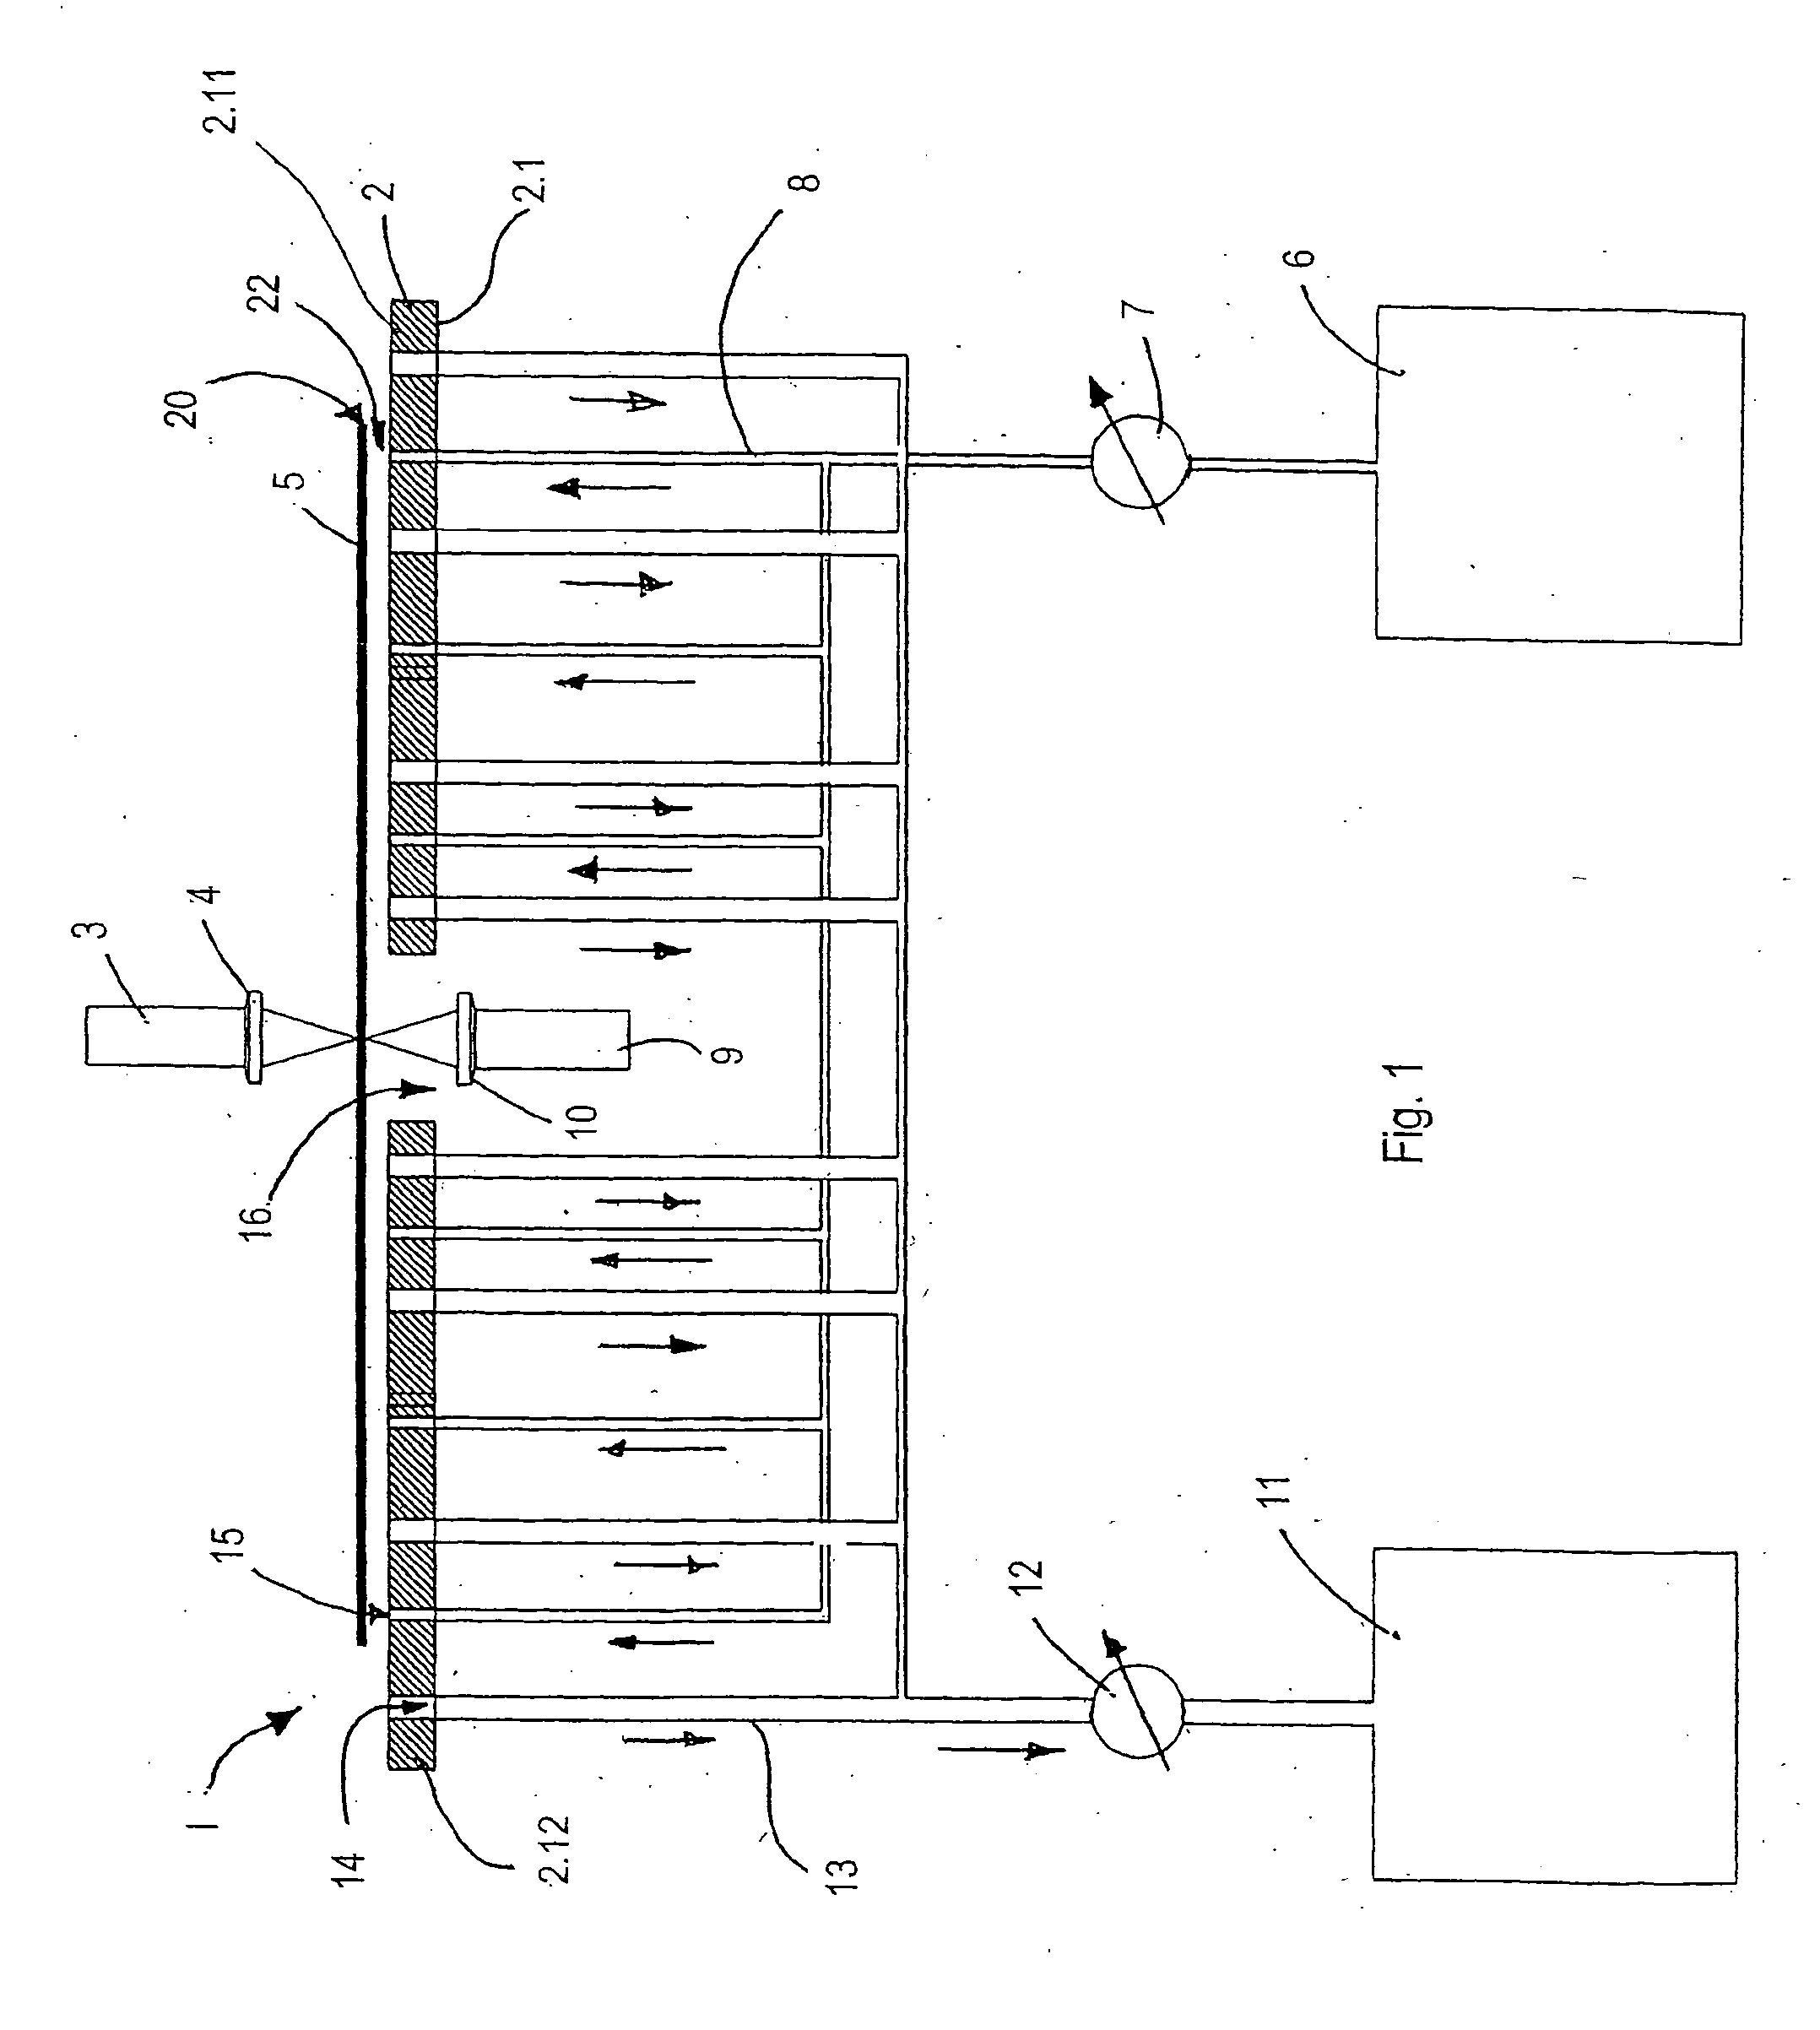 Table for Receiving a Workpiece and Method for Processing a Workpiece on Such Table